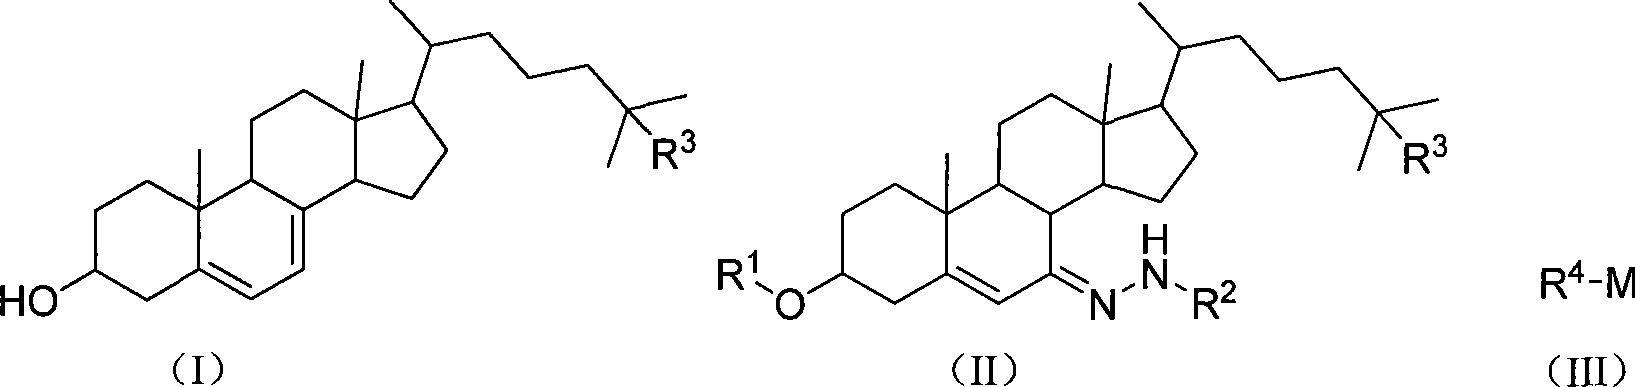 Chemical synthesis method of 5,7-diene steroids compounds